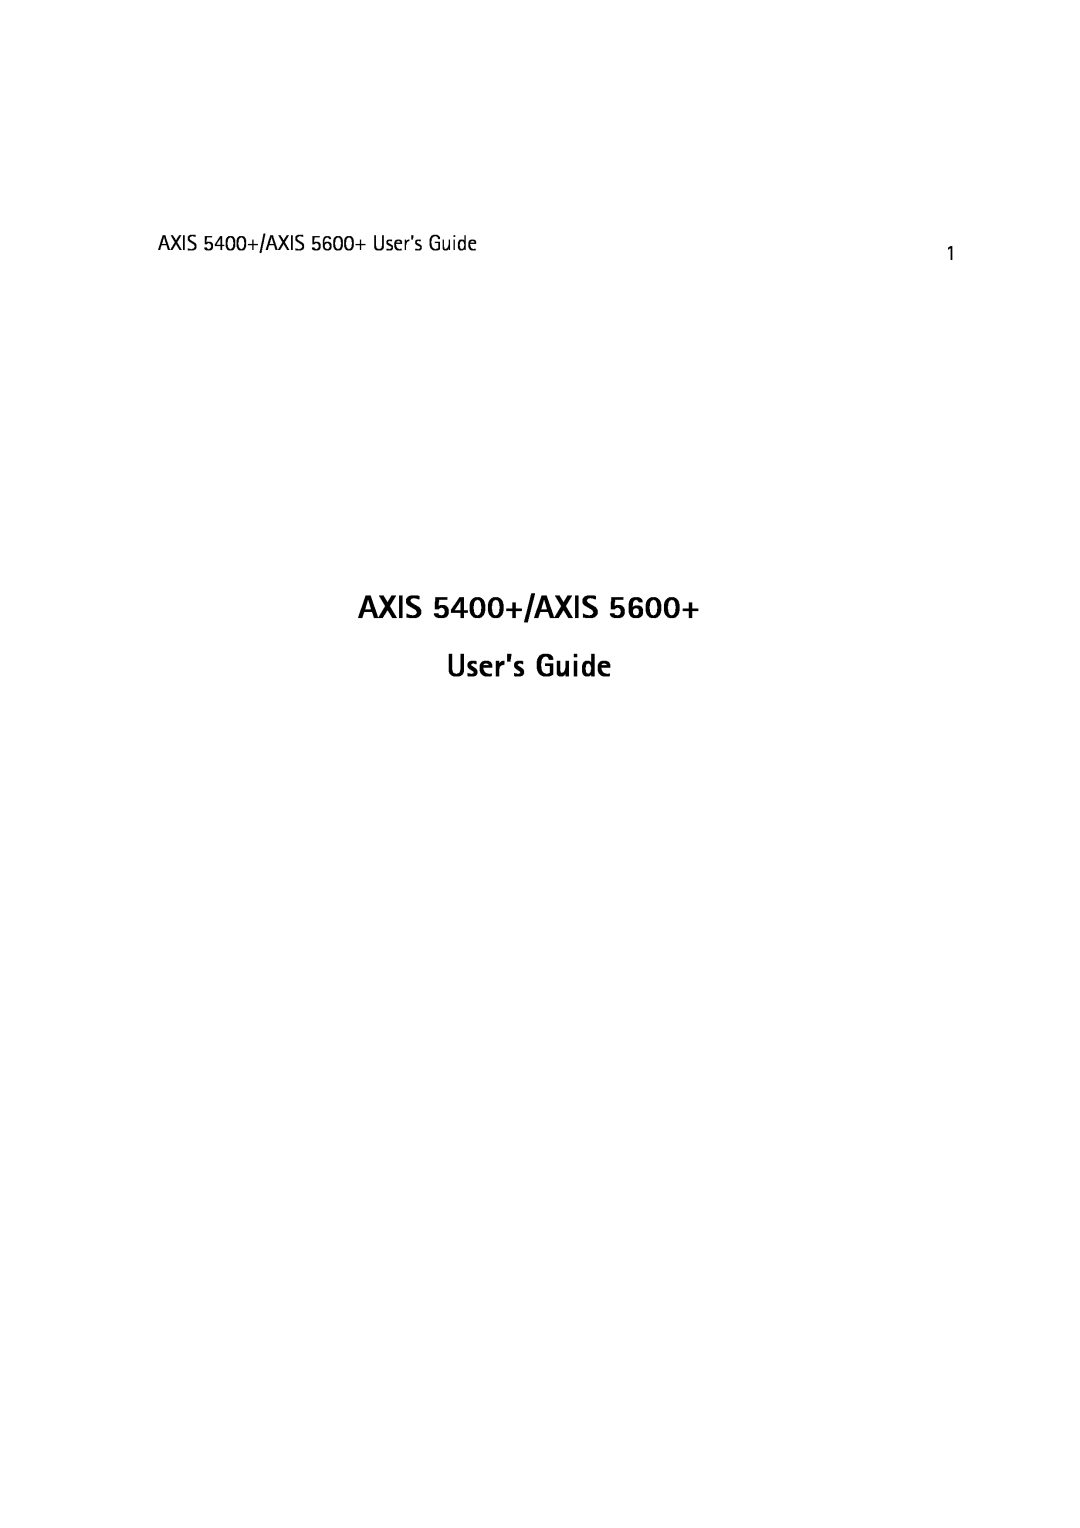 Dell manual AXIS 5400+/AXIS 5600+ User’s Guide 